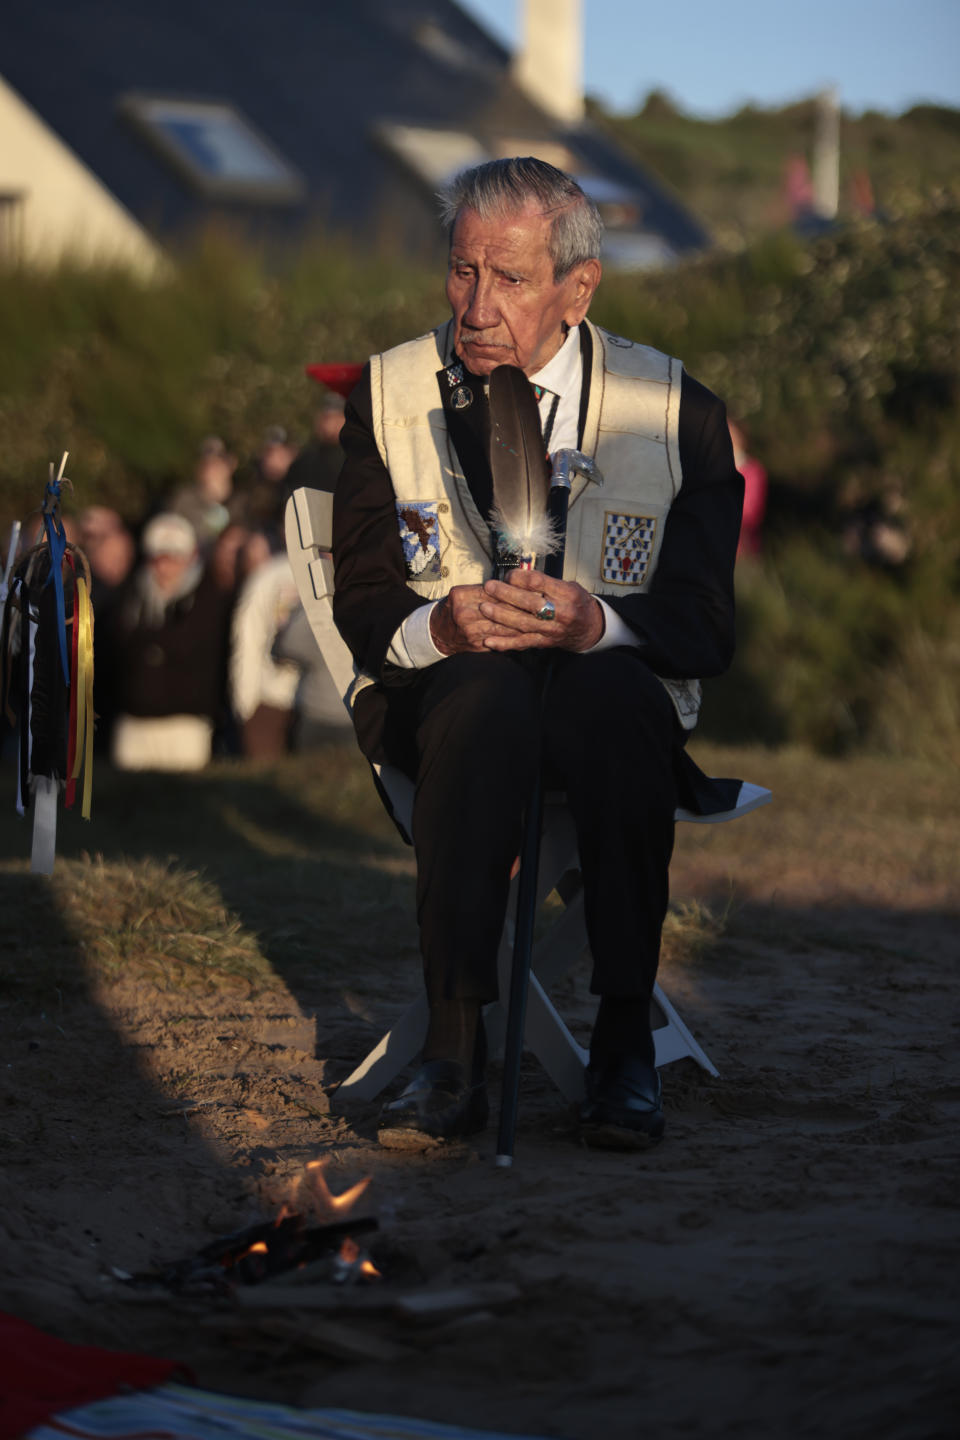 WWII veteran Charles Shay, 97 pays tribute to soldiers during a D-Day commemoration ceremony of the 78th anniversary for those who helped end World War II, in Saint-Laurent-sur-Mer, Normandy, France, Monday, June 6, 2022. (AP Photo/ Jeremias Gonzalez)